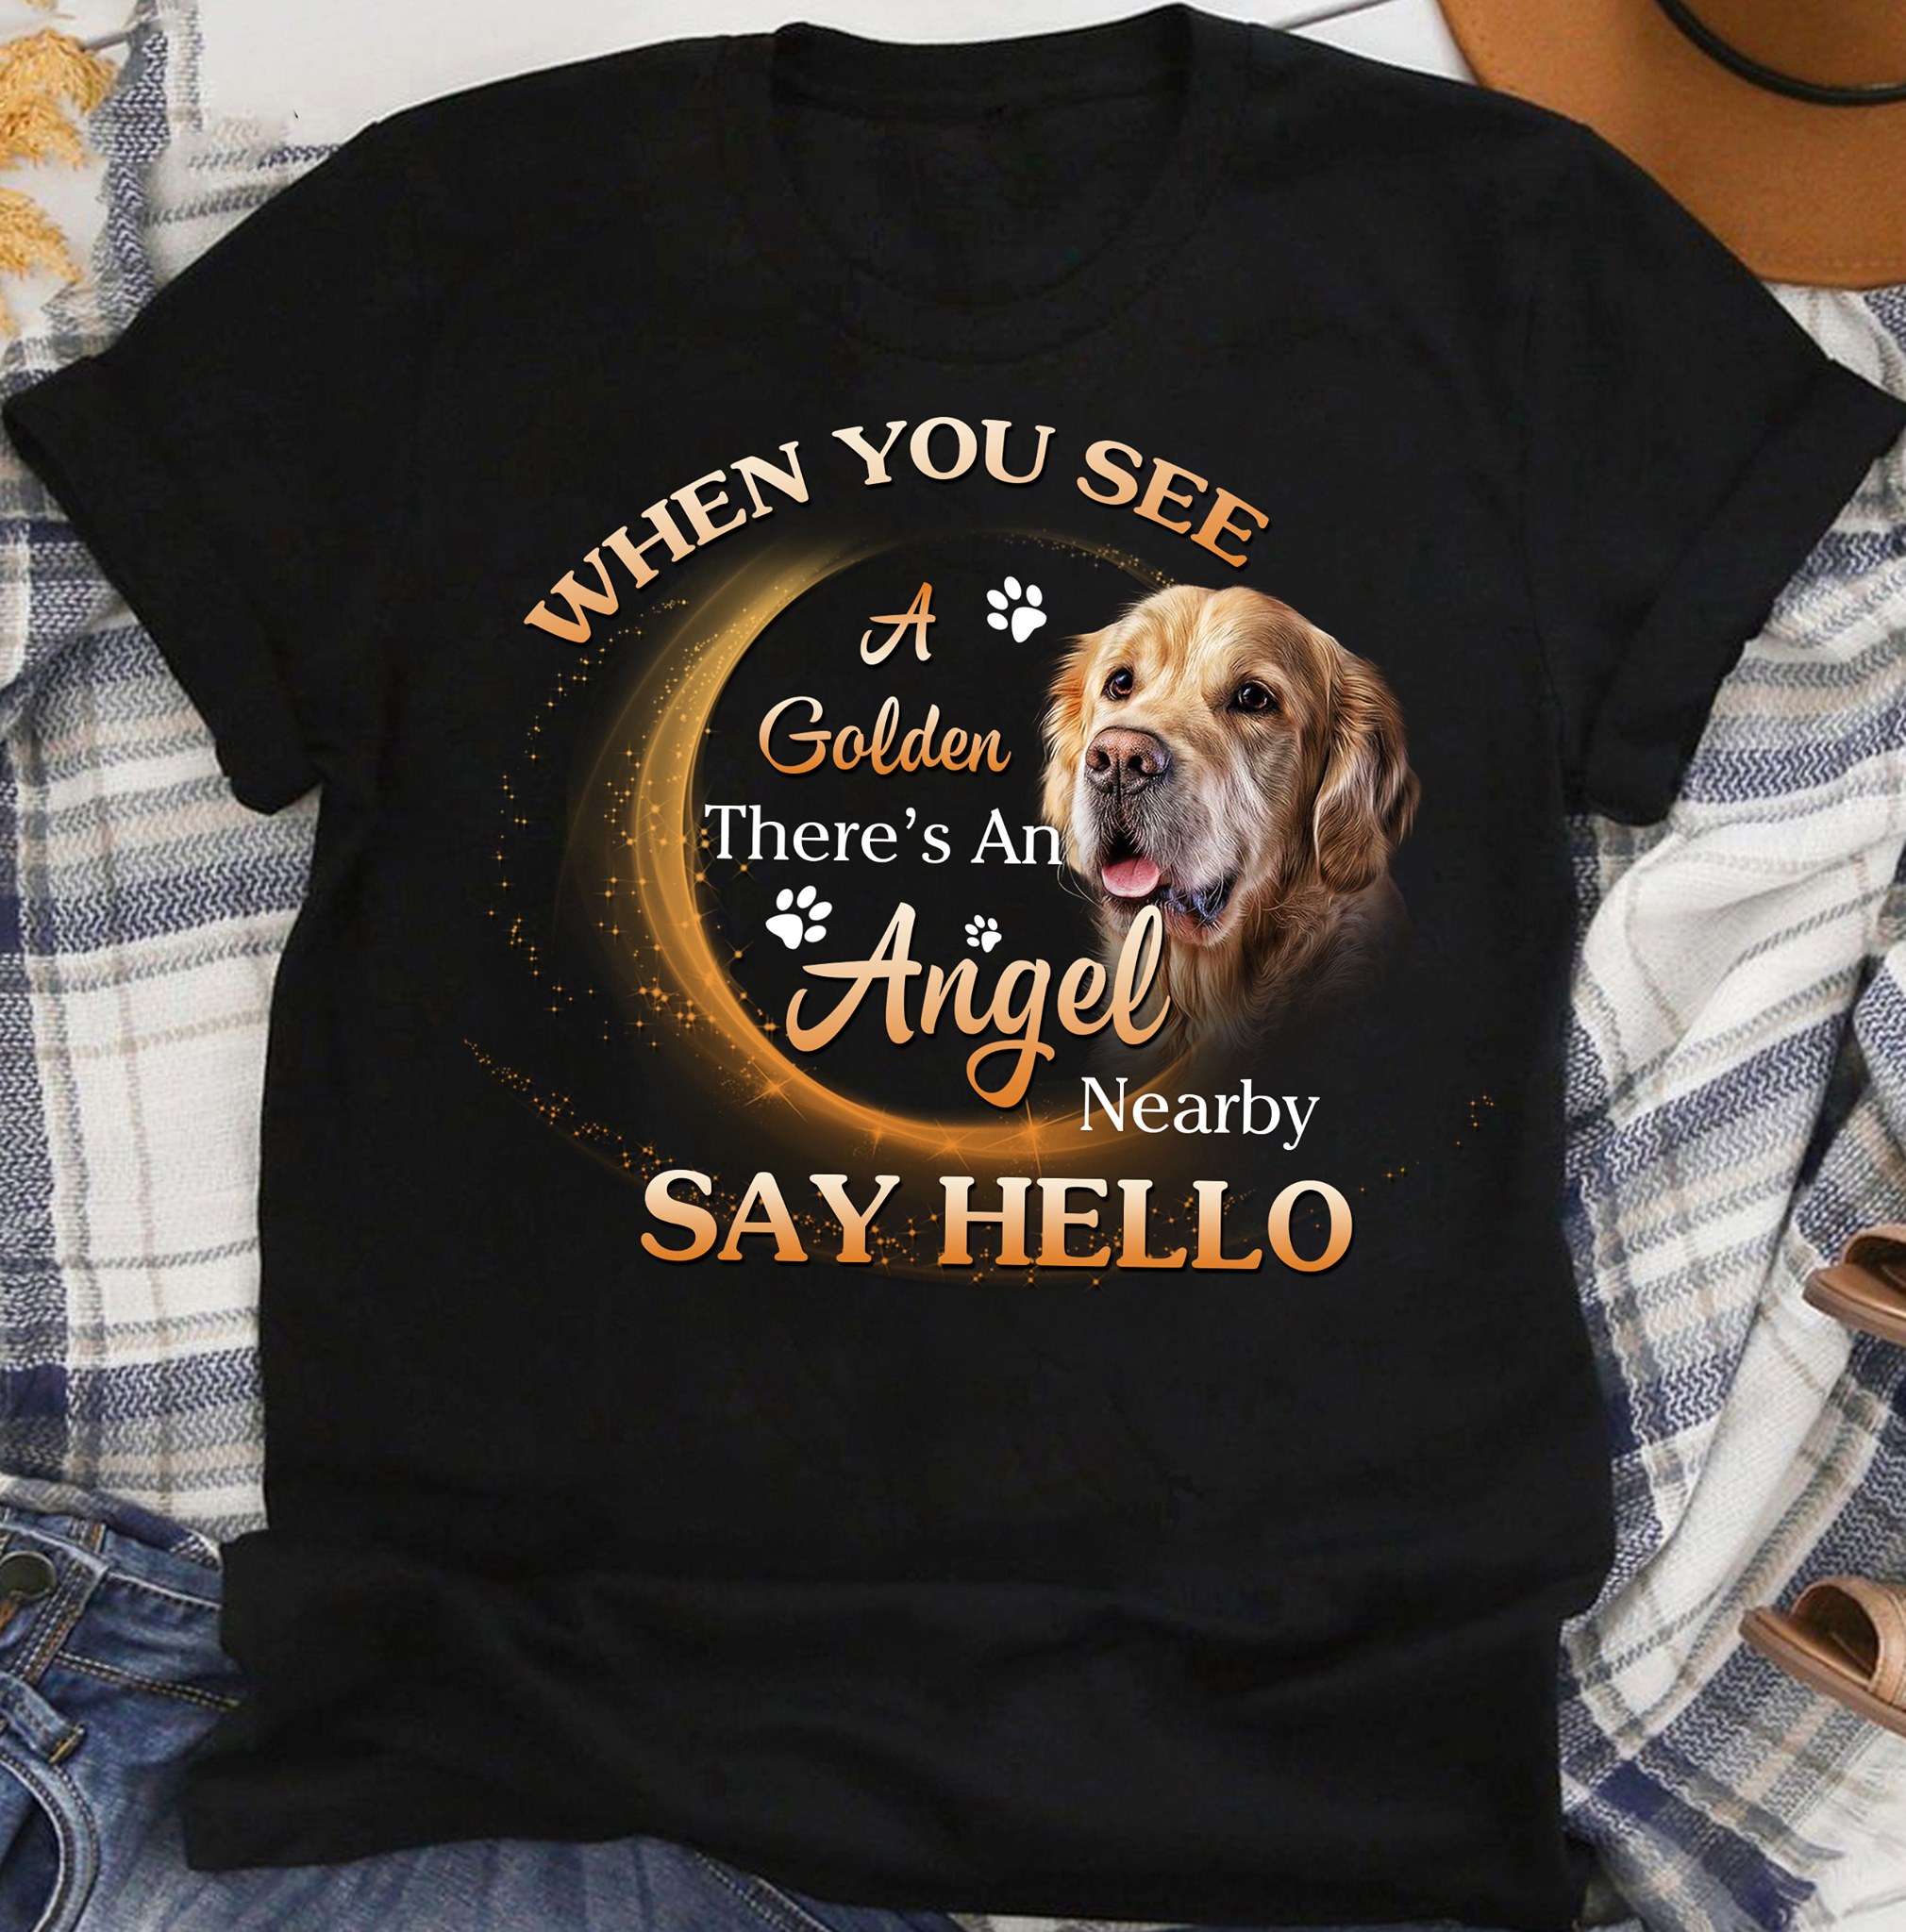 Golden Retriever - When you see a golden there's an angel nearby say hello